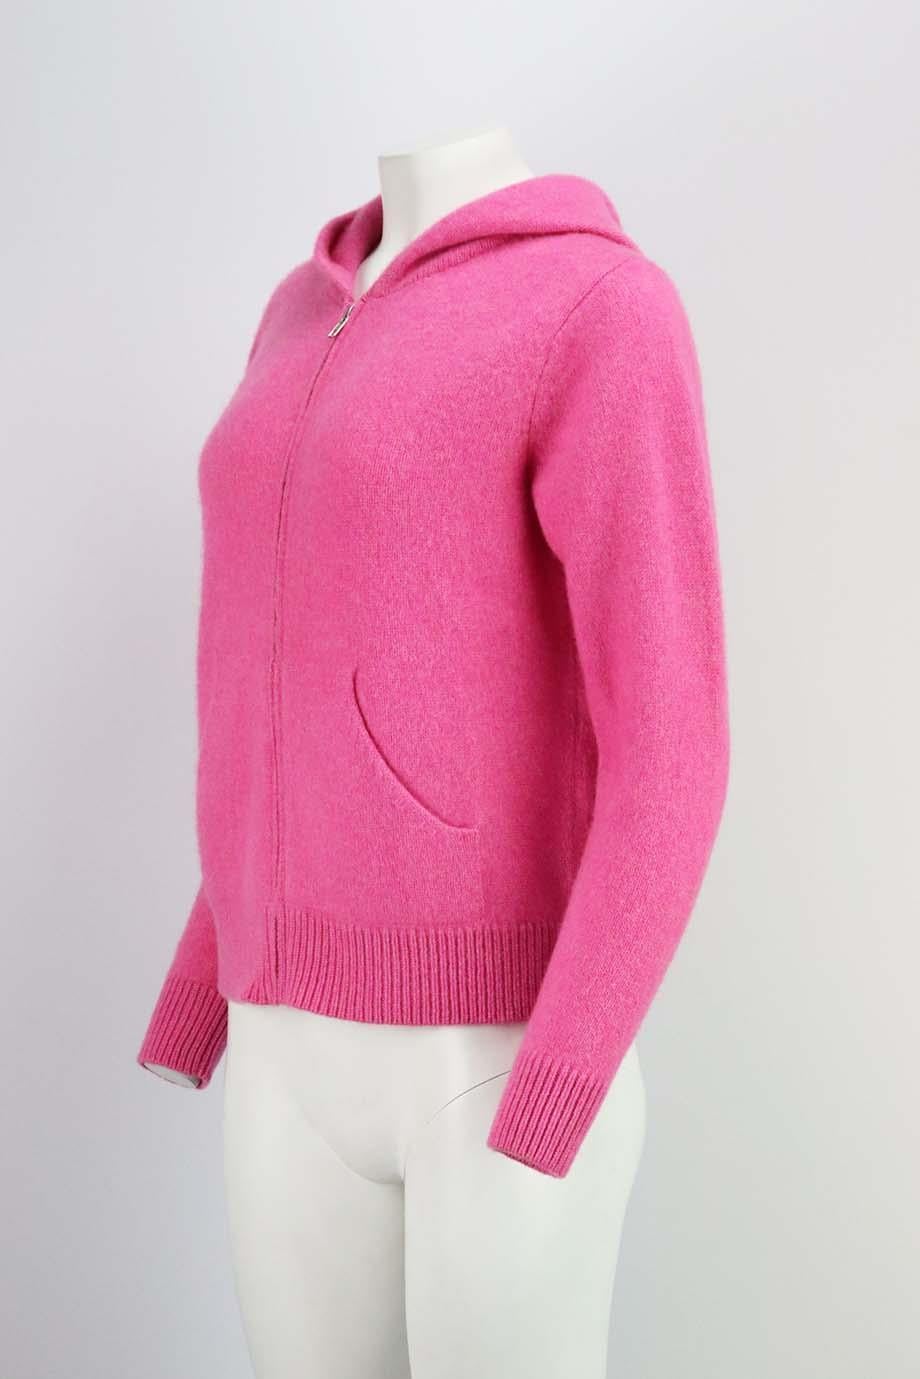 This hoodie by The Elder Statesman's designs come to life with the help of multiple skilled artisans, who hand-loom and dye each piece in the brand's small Los Angeles workshop, this zip-up hoodie is spun from bright-pink cashmere and has a cozy,